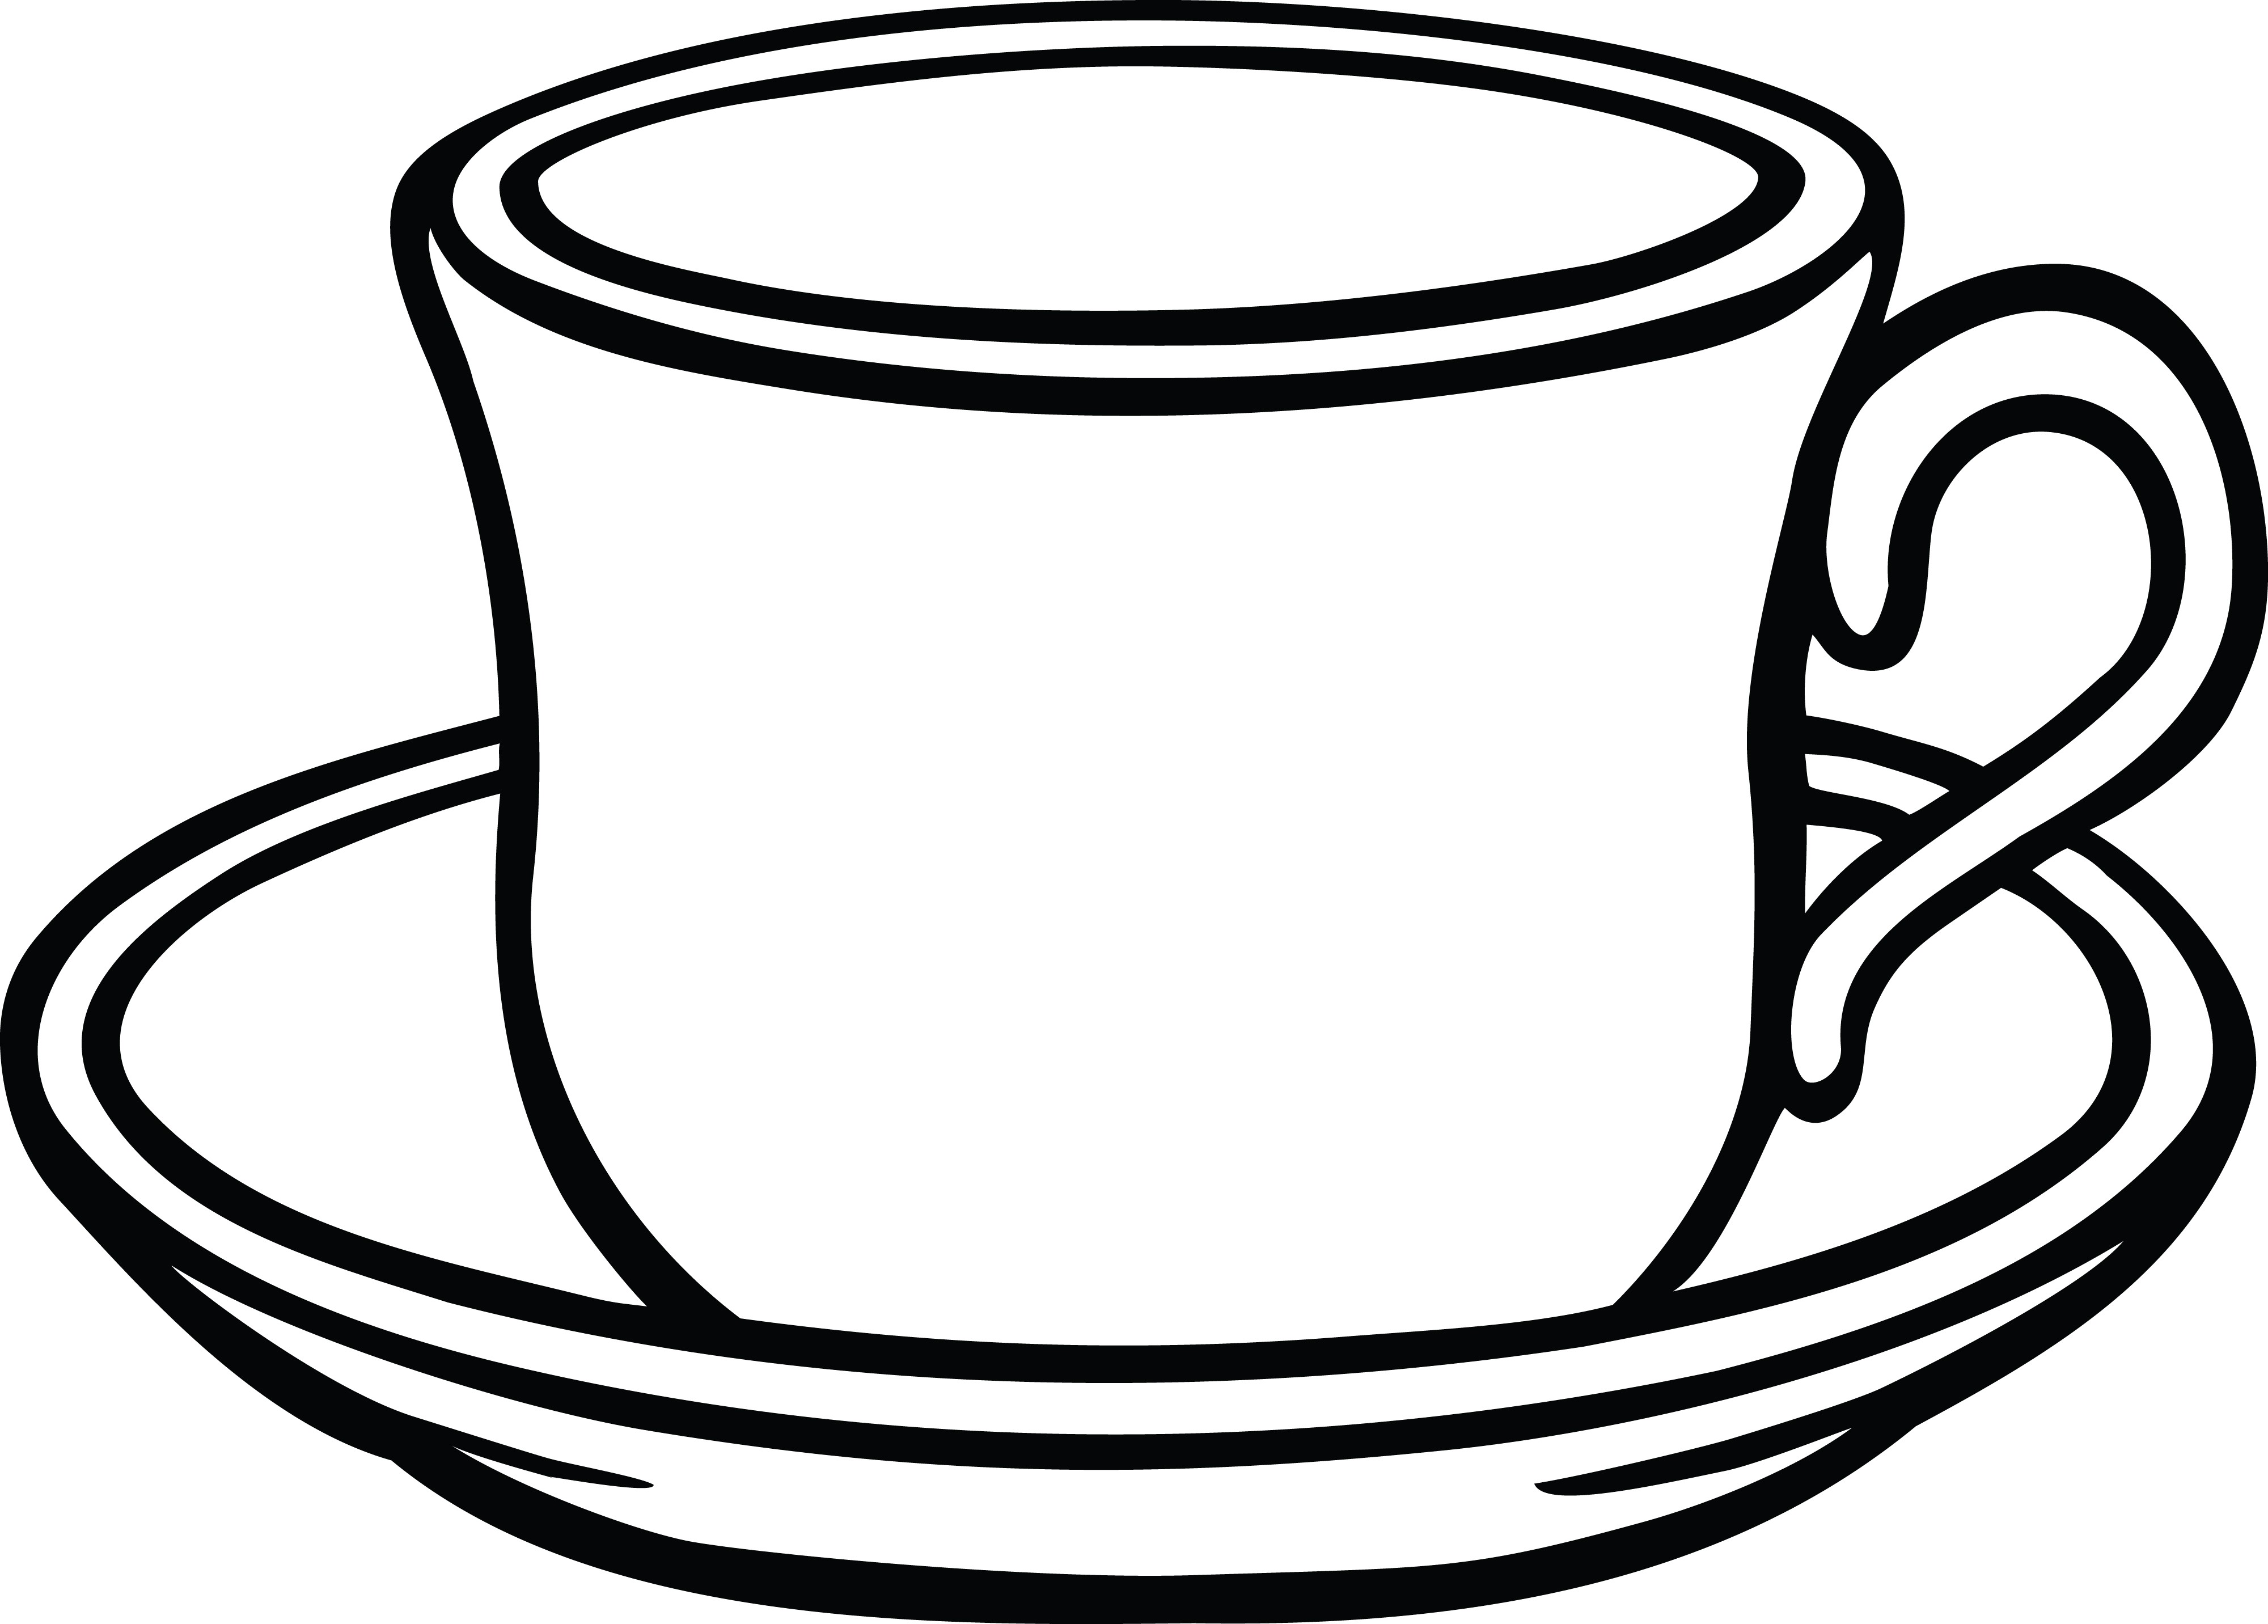 cup clipart cup saucer